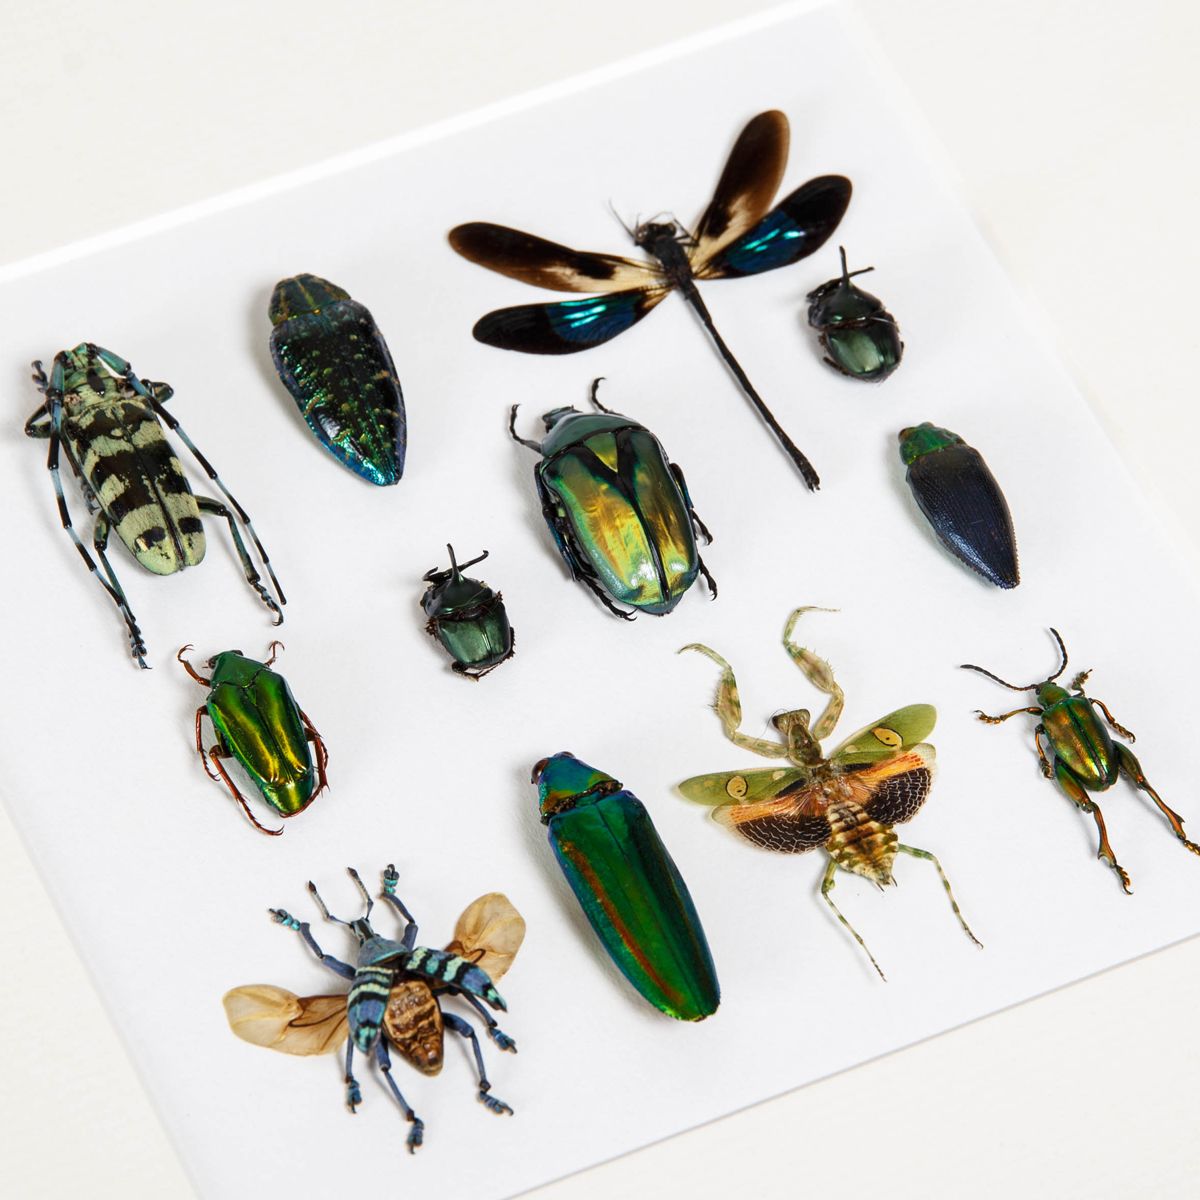 Multiple Insect Display in Box Frame